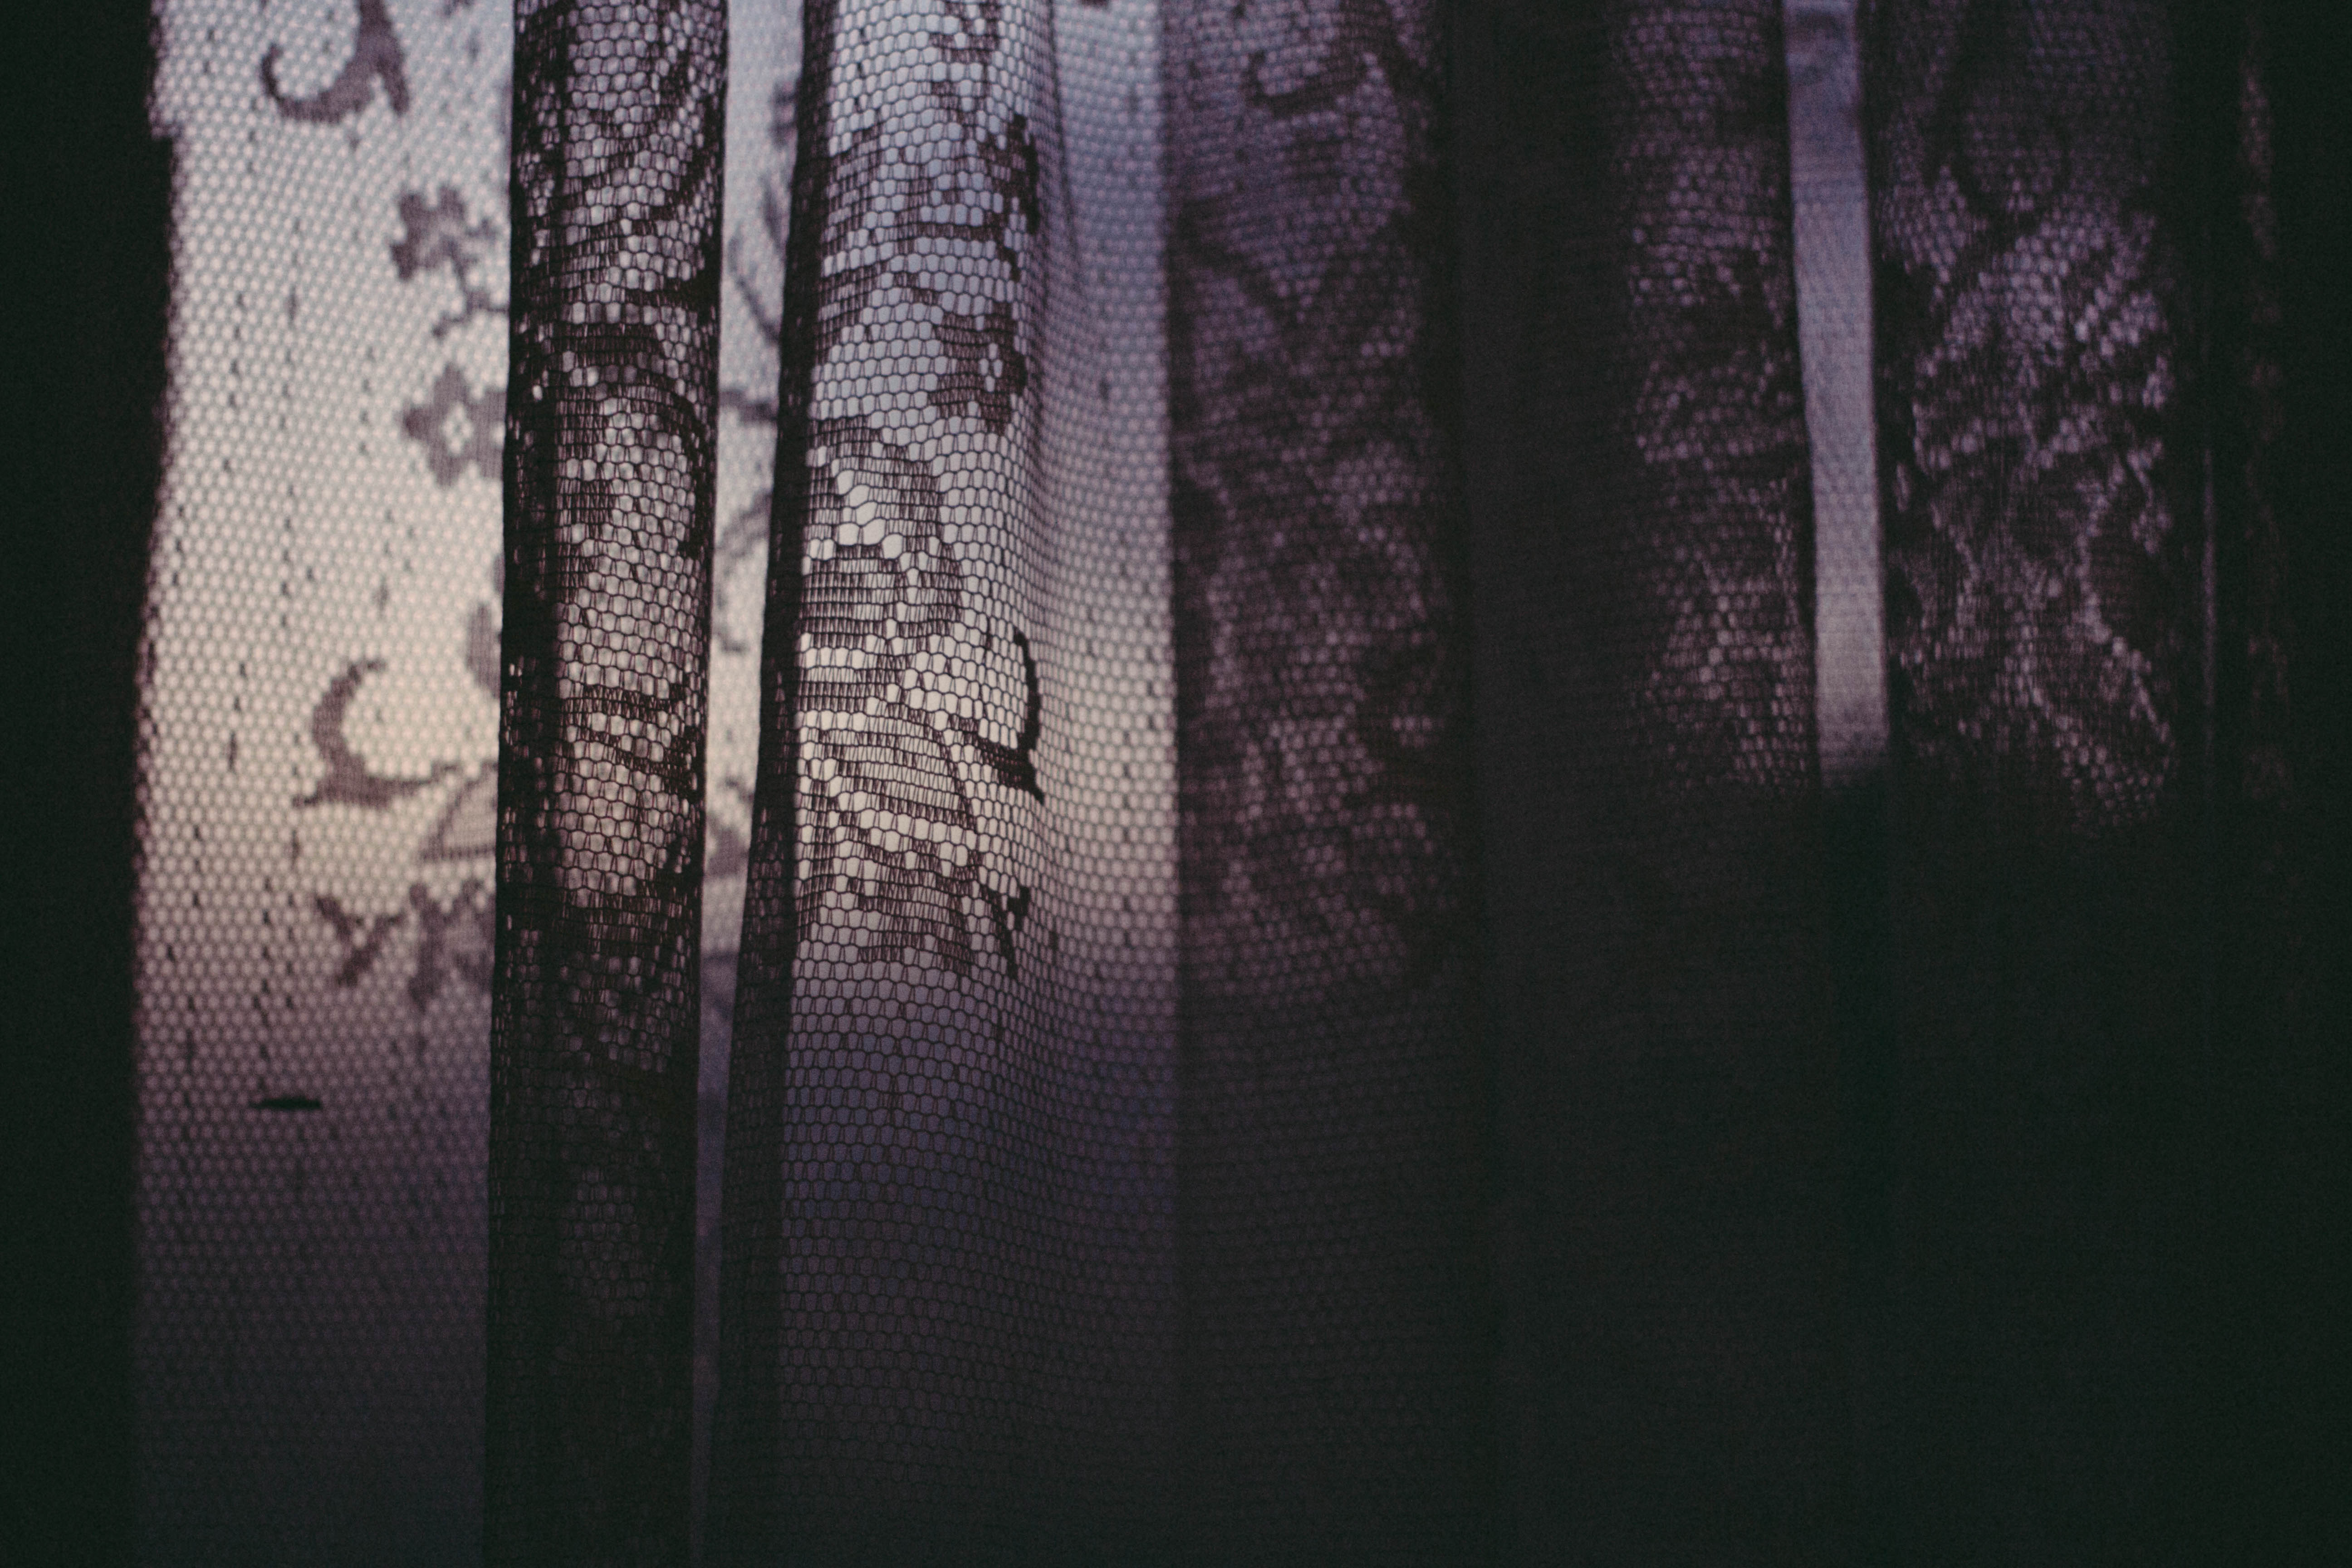 Lace Curtain You Drape Over Every Mirror